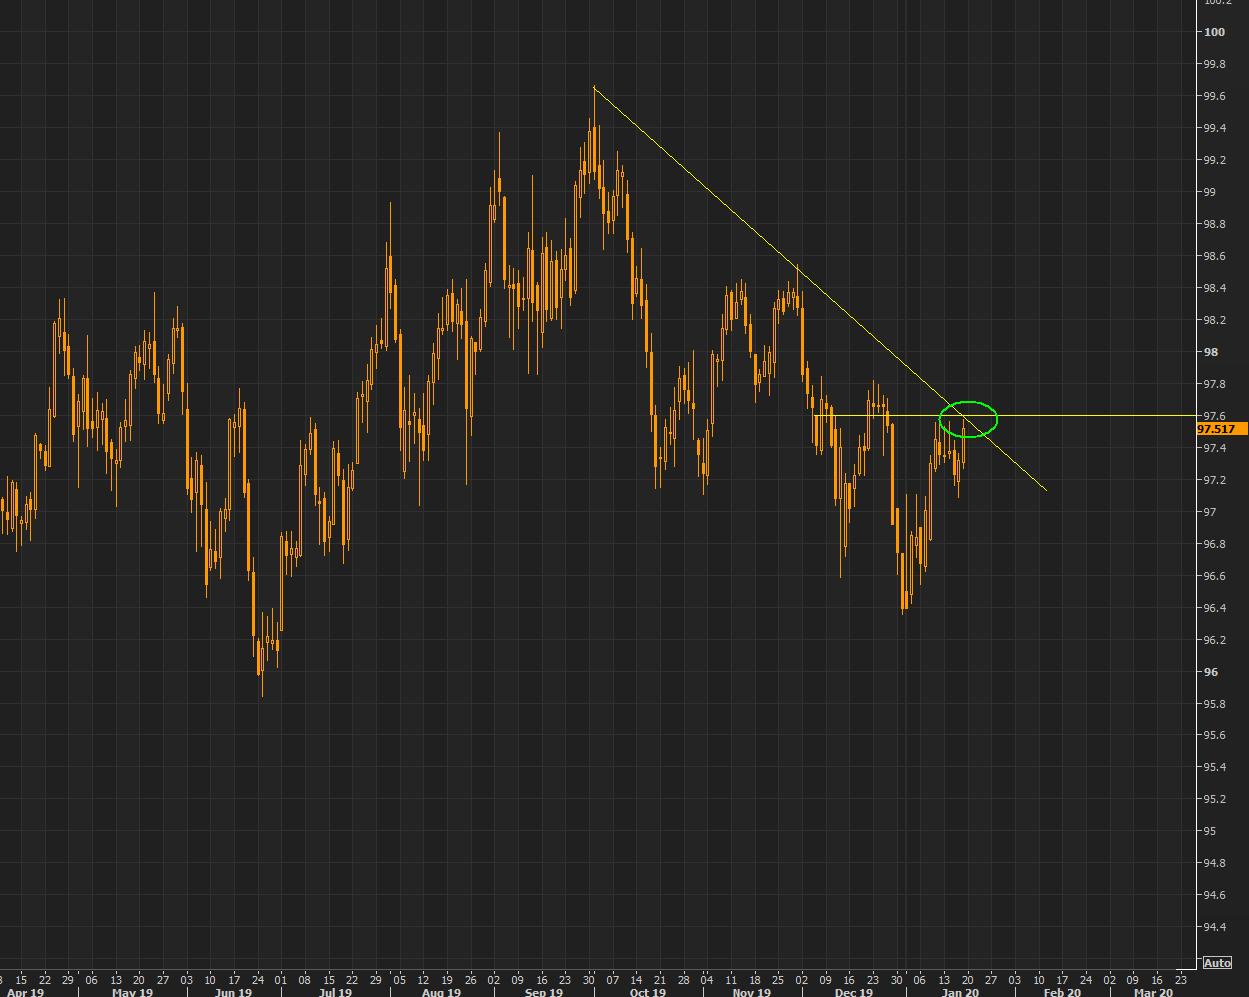 DXY - right at the negative trend line